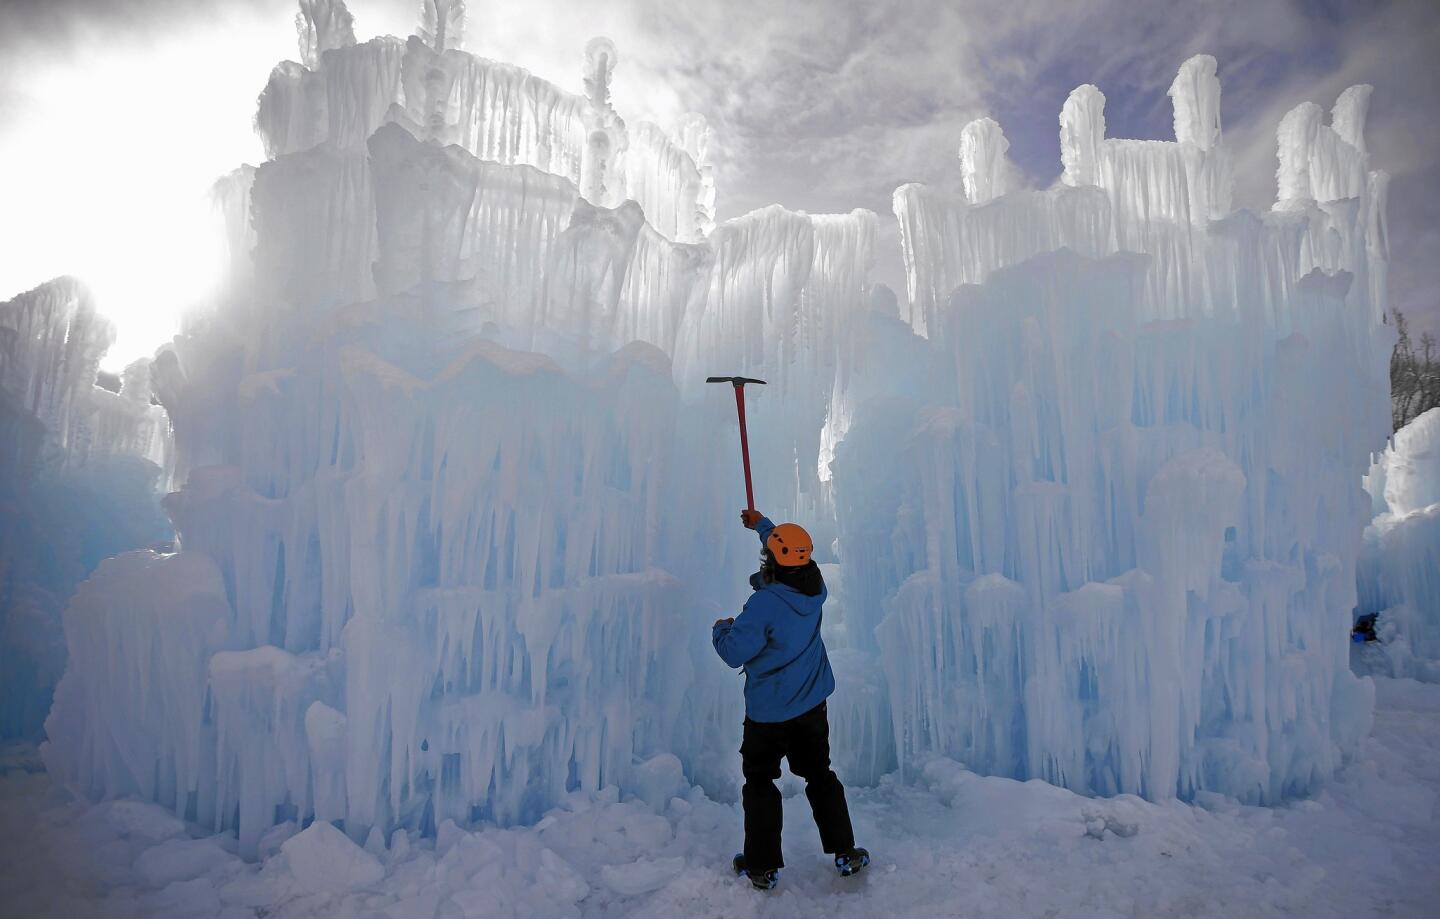 A worker helps sculpt the Ice Castles creation in Midway, Utah. Hundreds of thousands of icicles make up the thick walls, jagged mazes and fountains of the castle.